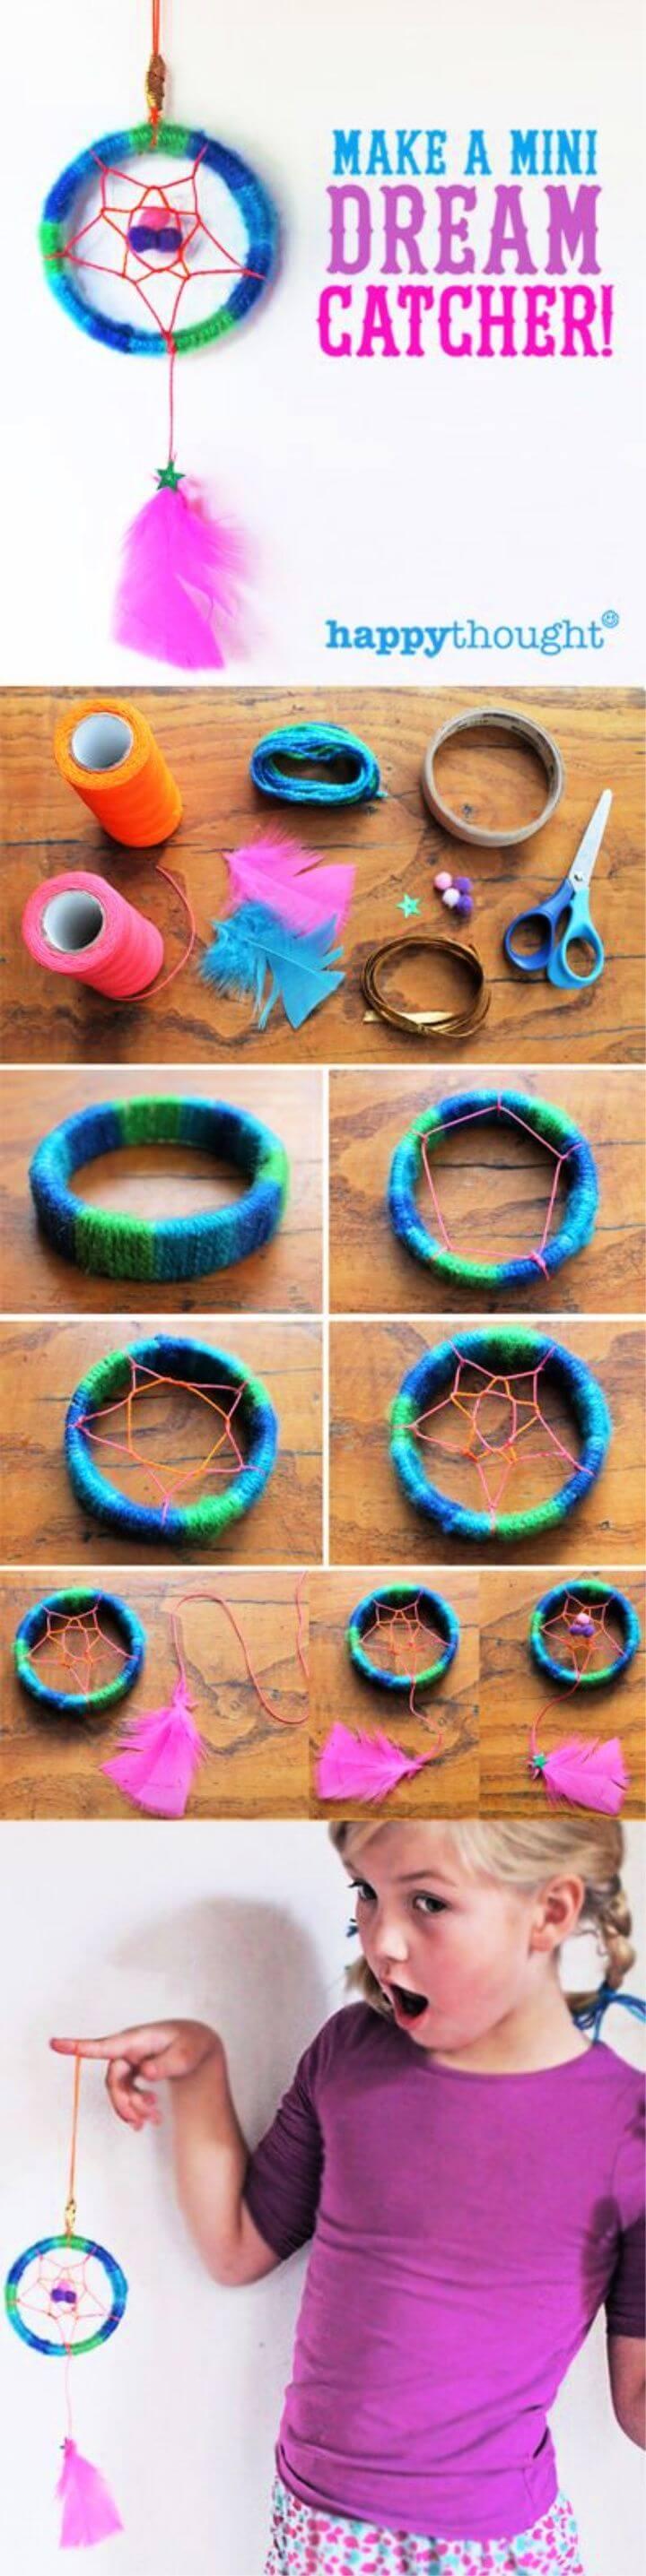 Super Cute Mini Dreamcatcher Tutorial with Free Printable Worksheets